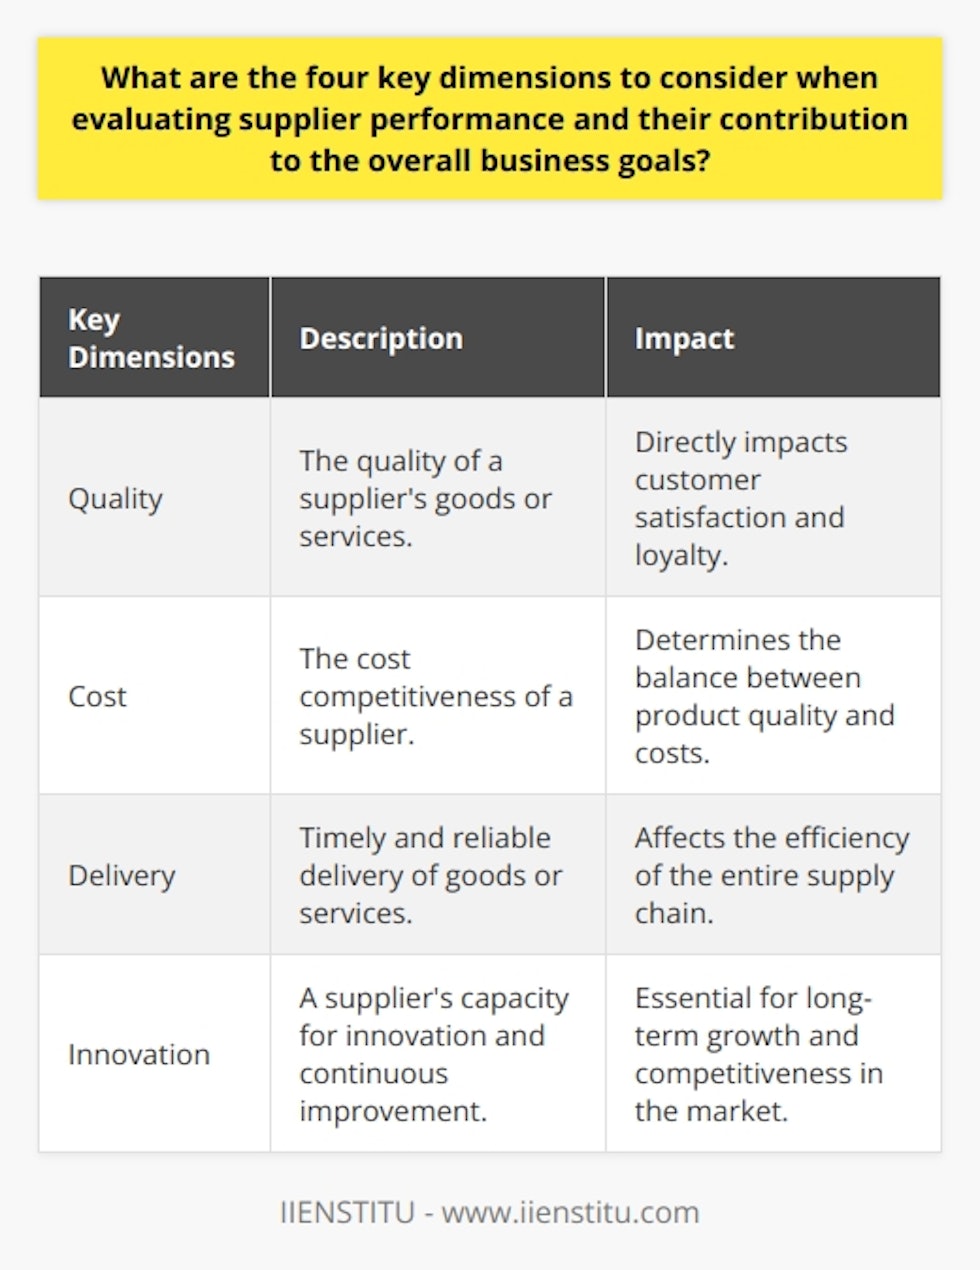 Key Dimension 1: QualityThe quality of a supplier's goods or services is a crucial dimension to consider when evaluating their performance. Consistently meeting or exceeding quality expectations directly impacts customer satisfaction and loyalty, which are essential for the long-term success of a business. Monitoring product defects, return rates, and customer feedback can provide insights into the effectiveness of a supplier's quality management system.Key Dimension 2: CostThe cost competitiveness of a supplier is another important aspect to evaluate. It goes beyond the initial price offered and encompasses the total cost of ownership, including ongoing support, maintenance, and potential hidden costs. This evaluation helps determine if a supplier offers a favorable balance between product quality and costs, ultimately impacting the company's profitability.Key Dimension 3: DeliveryTimely and reliable delivery is critical for assessing a supplier's performance. It impacts the efficiency of the entire supply chain and the company's ability to meet customer demands on time. Measuring metrics such as on-time delivery rate, lead time, and responsiveness to urgent requests provides a comprehensive understanding of a supplier's logistics management and their contribution to maintaining optimal product inventory levels.Key Dimension 4: InnovationA supplier's capacity for innovation and continuous improvement is essential for a company's long-term growth and competitiveness in a rapidly changing market. Assessing a supplier's R&D capabilities, proactivity in offering new solutions, and flexibility in adapting to new technologies and trends can provide valuable insights into potential synergies between the supplier and the business. A supplier that drives innovative breakthroughs can contribute to creating new market opportunities and improving operational efficiency for the company.In conclusion, evaluating supplier performance involves considering key dimensions such as quality, cost, delivery, and innovation. By assessing these dimensions, businesses can make informed decisions about their suppliers and ensure that their contributions align with overall business goals.